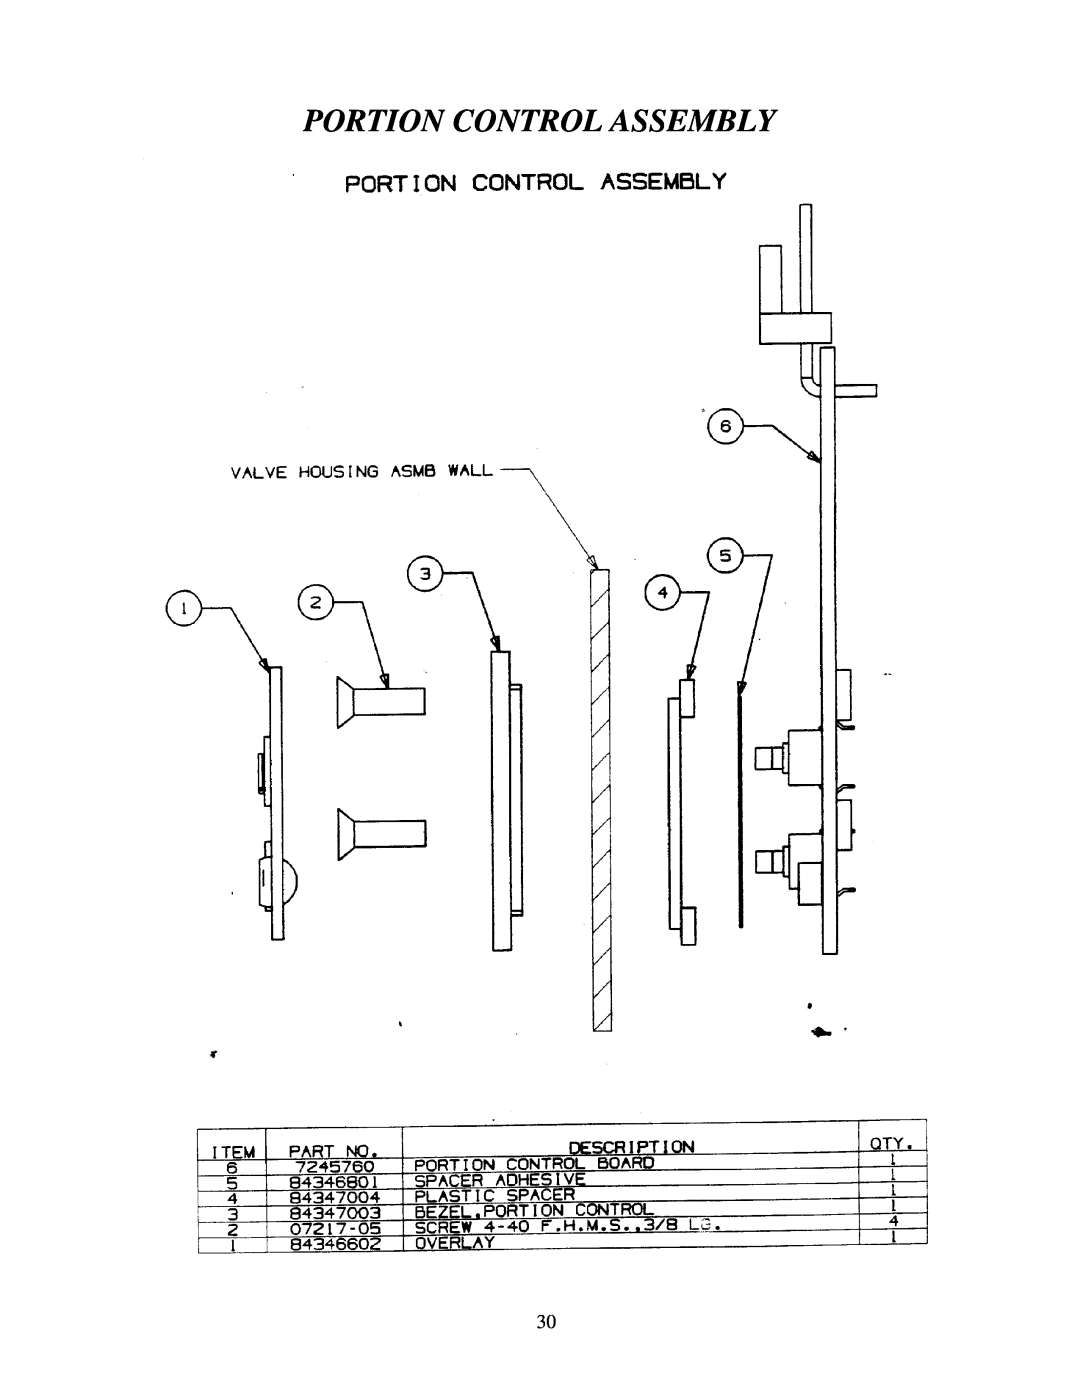 Cornelius MJ32-4 PC, MJ32-4 PB, MJ30-4 PB, MJ30-4 PC, MJ31-4 PB, MJ31-4 PC service manual Portion Control Assembly 